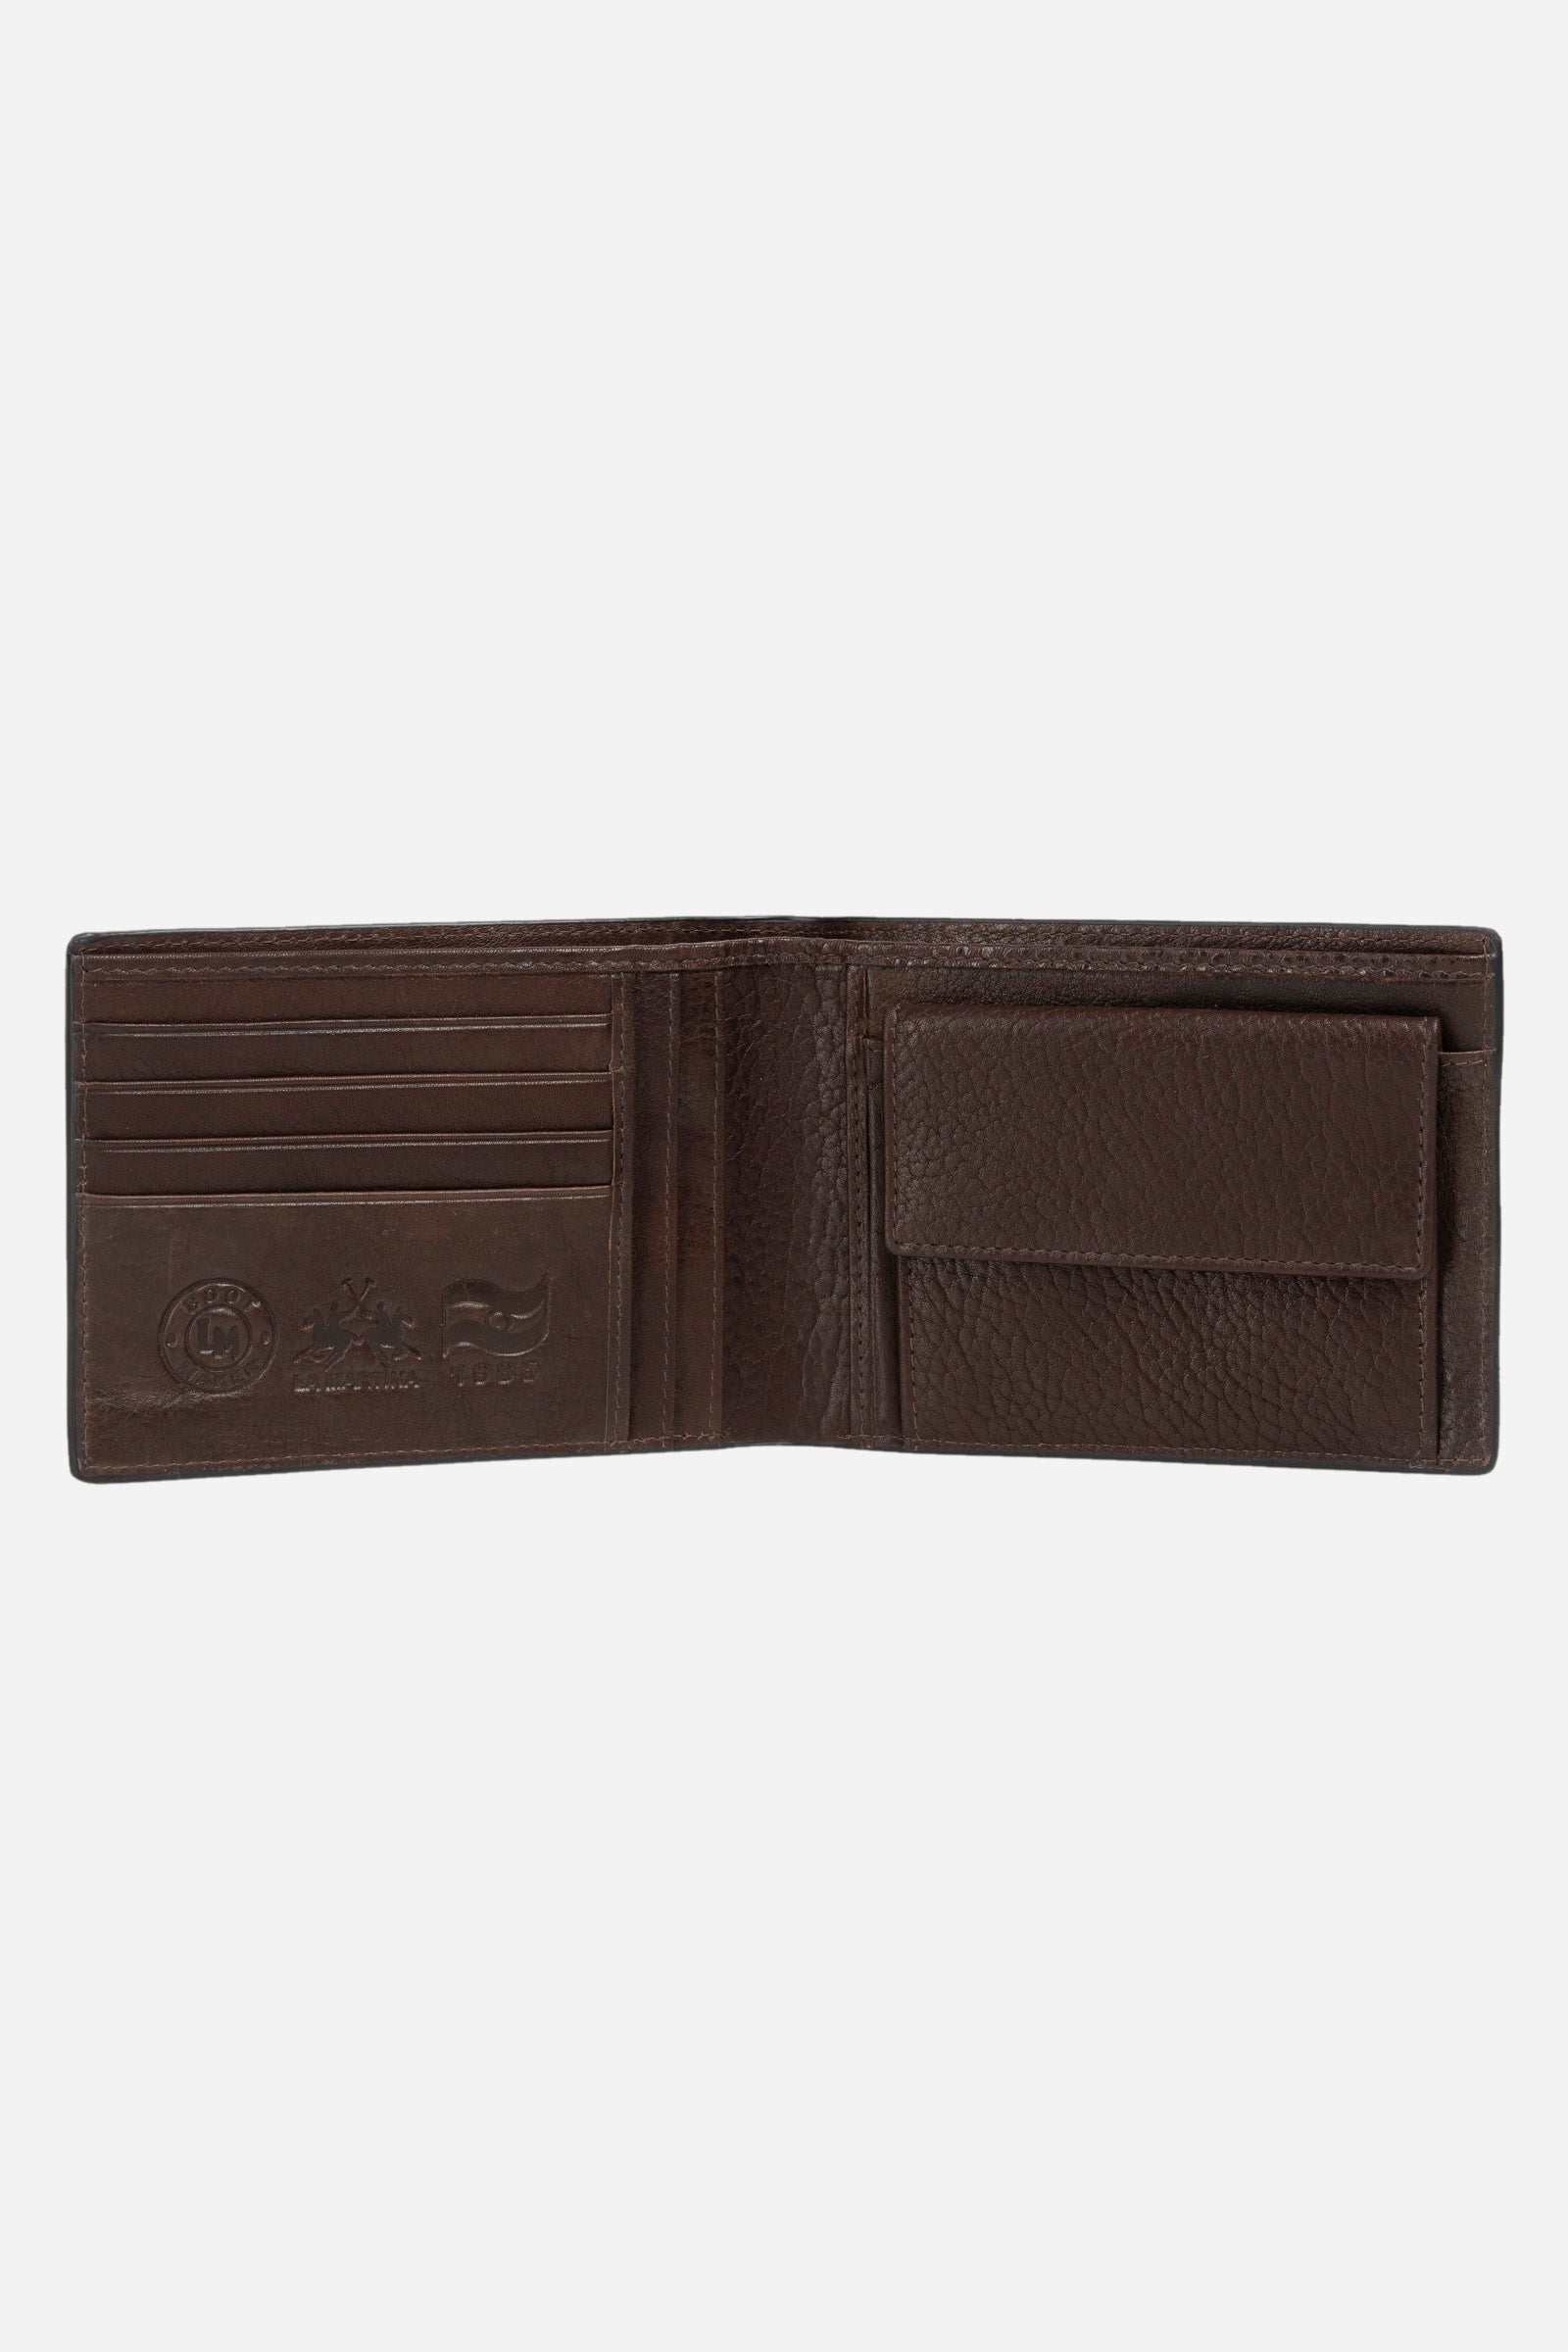 Leather wallet - Paulo